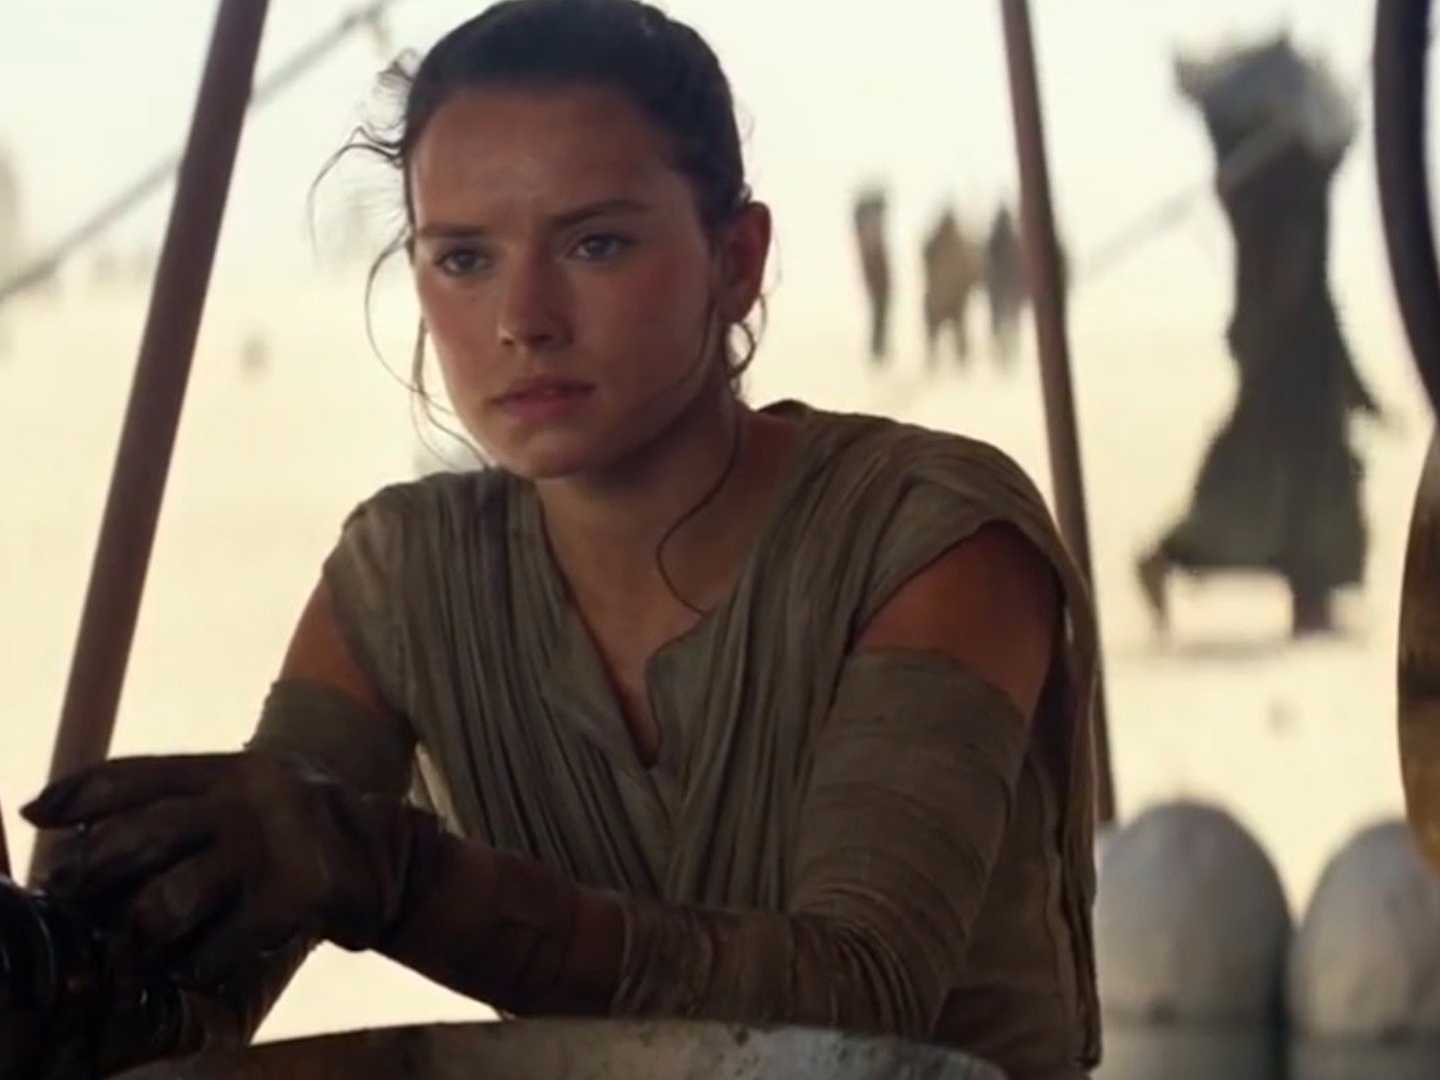 Daisy Ridley weighed in on this kinda sexist critique of her